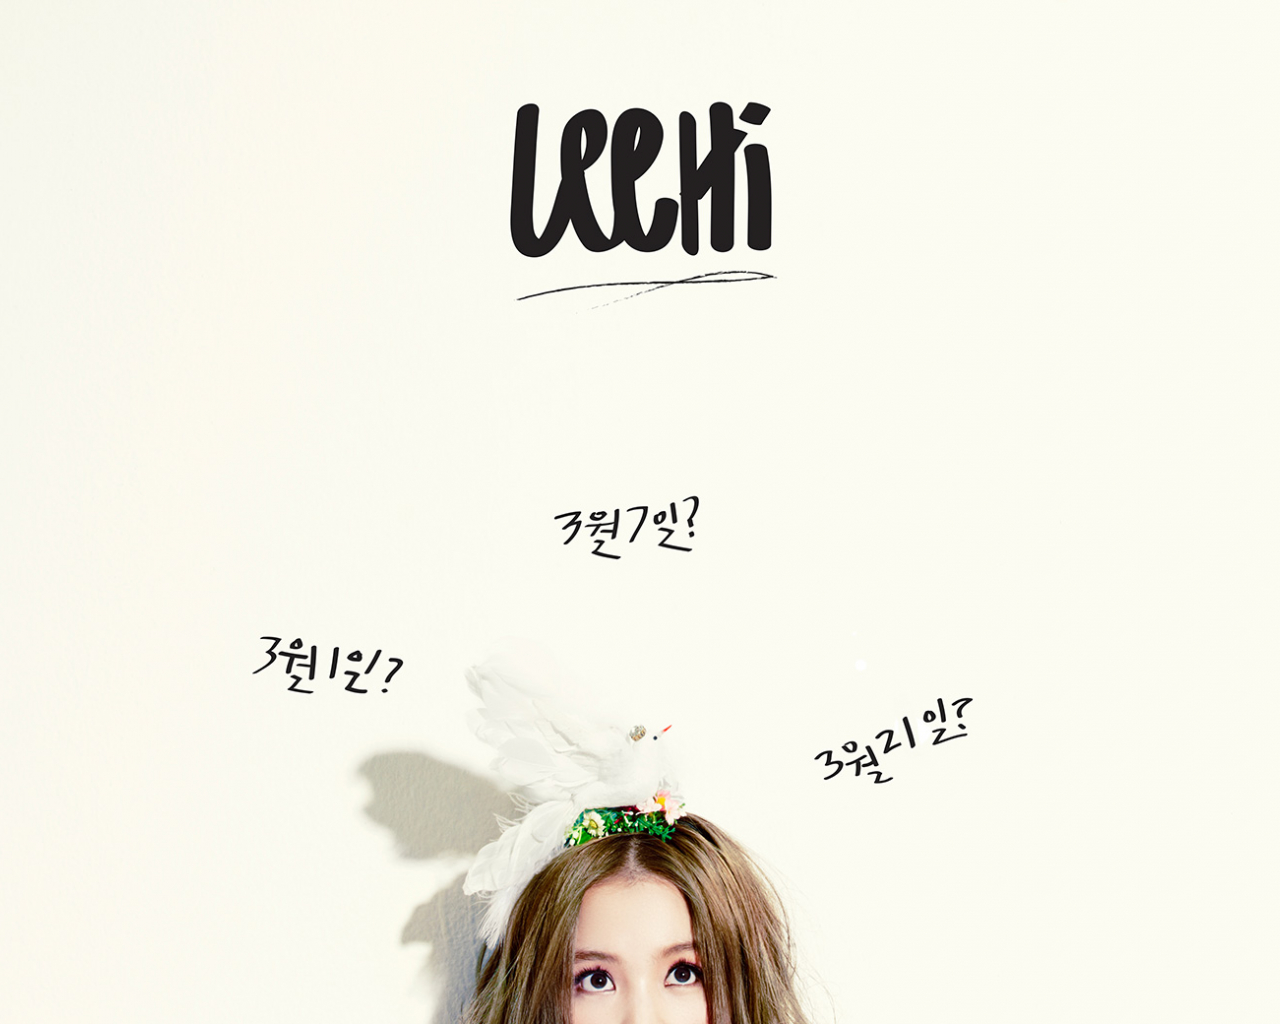 Lee Hi First Love Wallpaper Pictures Beautiful Song